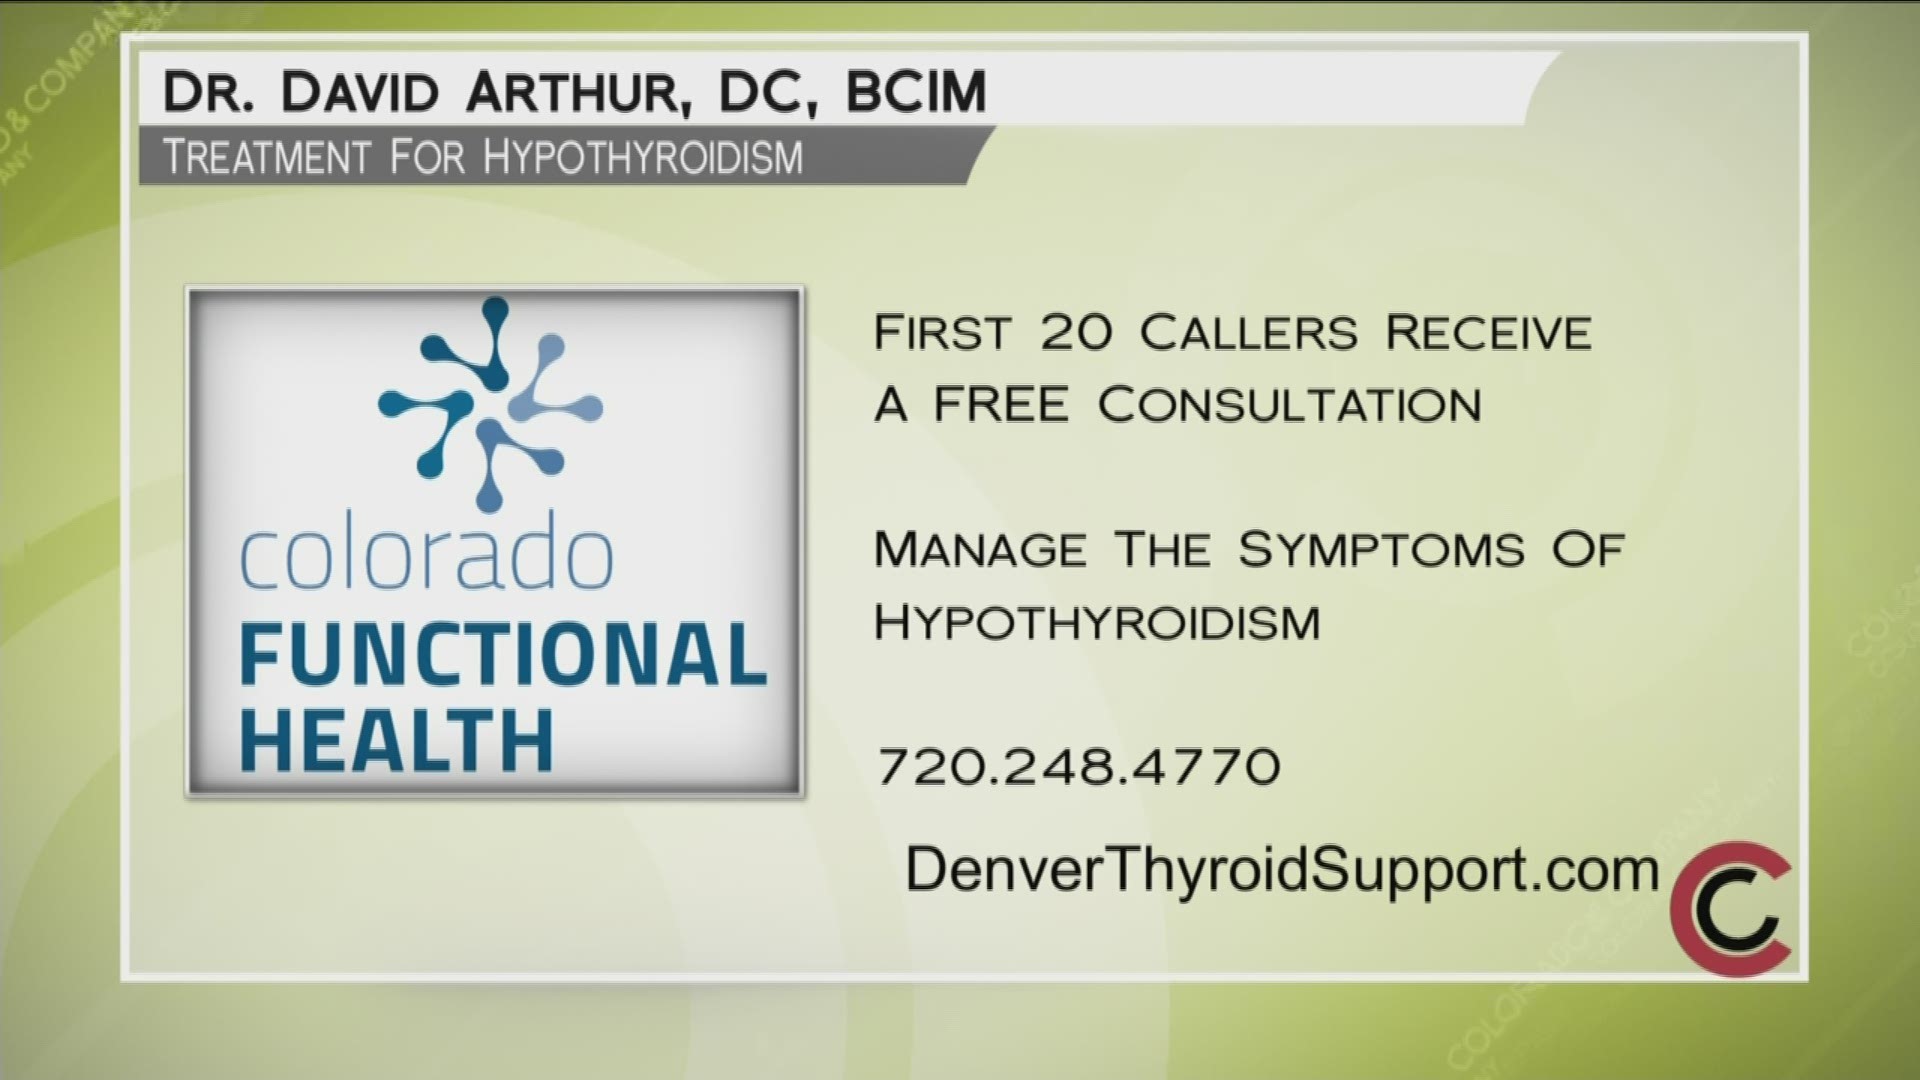 Dr. Arthur has 20 free initial consultations for the first 20 who call 720.248.4770. Learn more at DenverThyroidSupport.com.